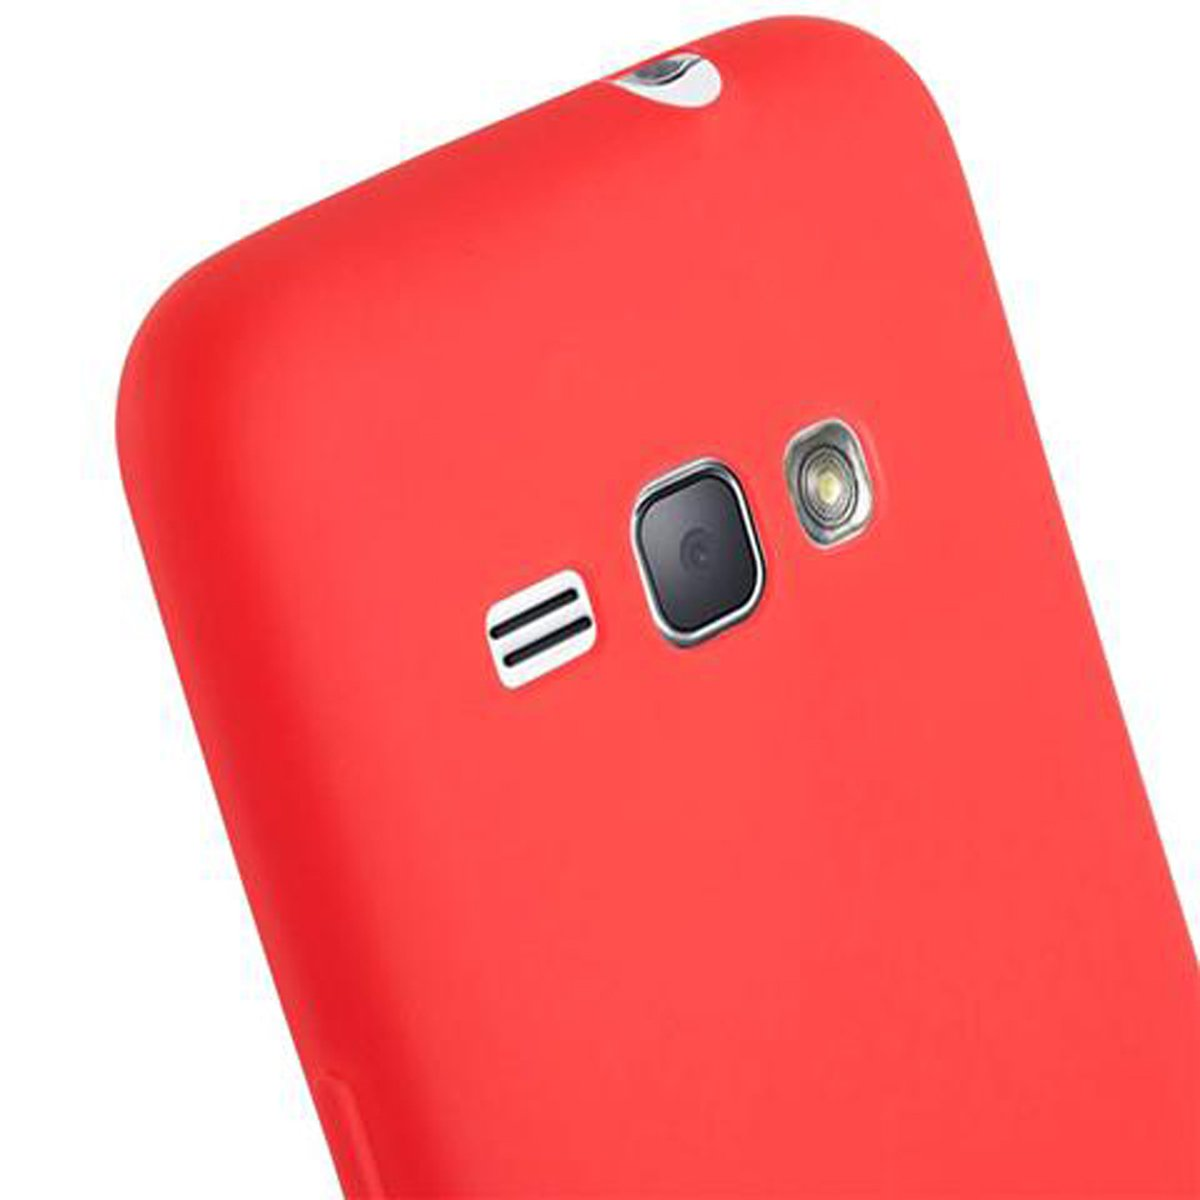 ROT J1 Style, im Samsung, 2016, Backcover, Galaxy Hülle CADORABO Candy TPU CANDY